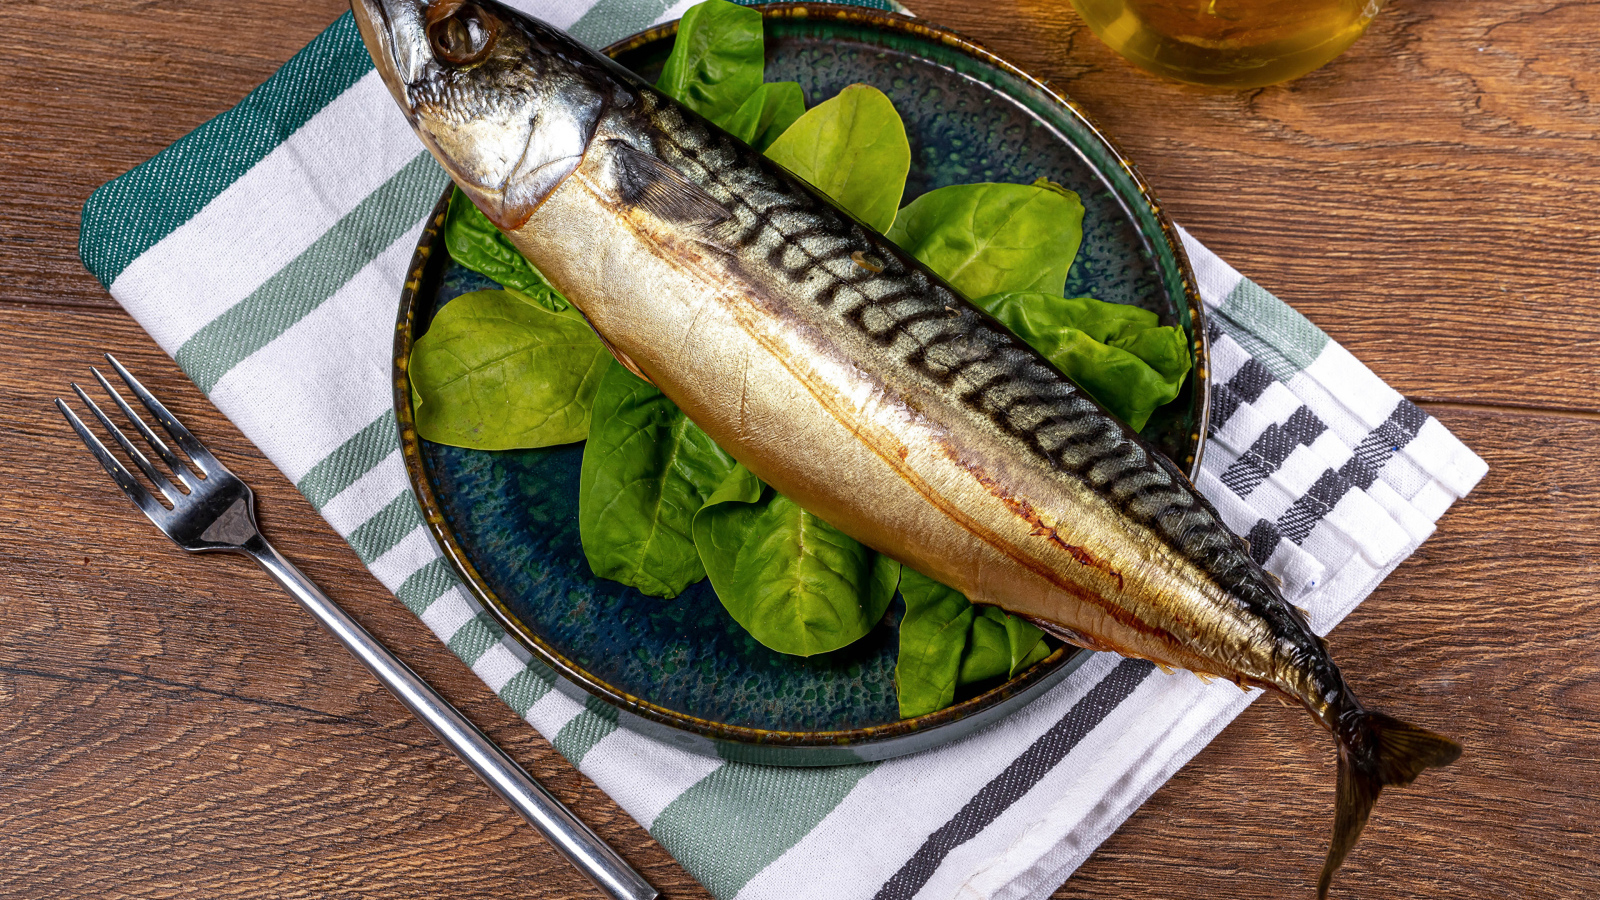 Large fat mackerel on a plate of basil